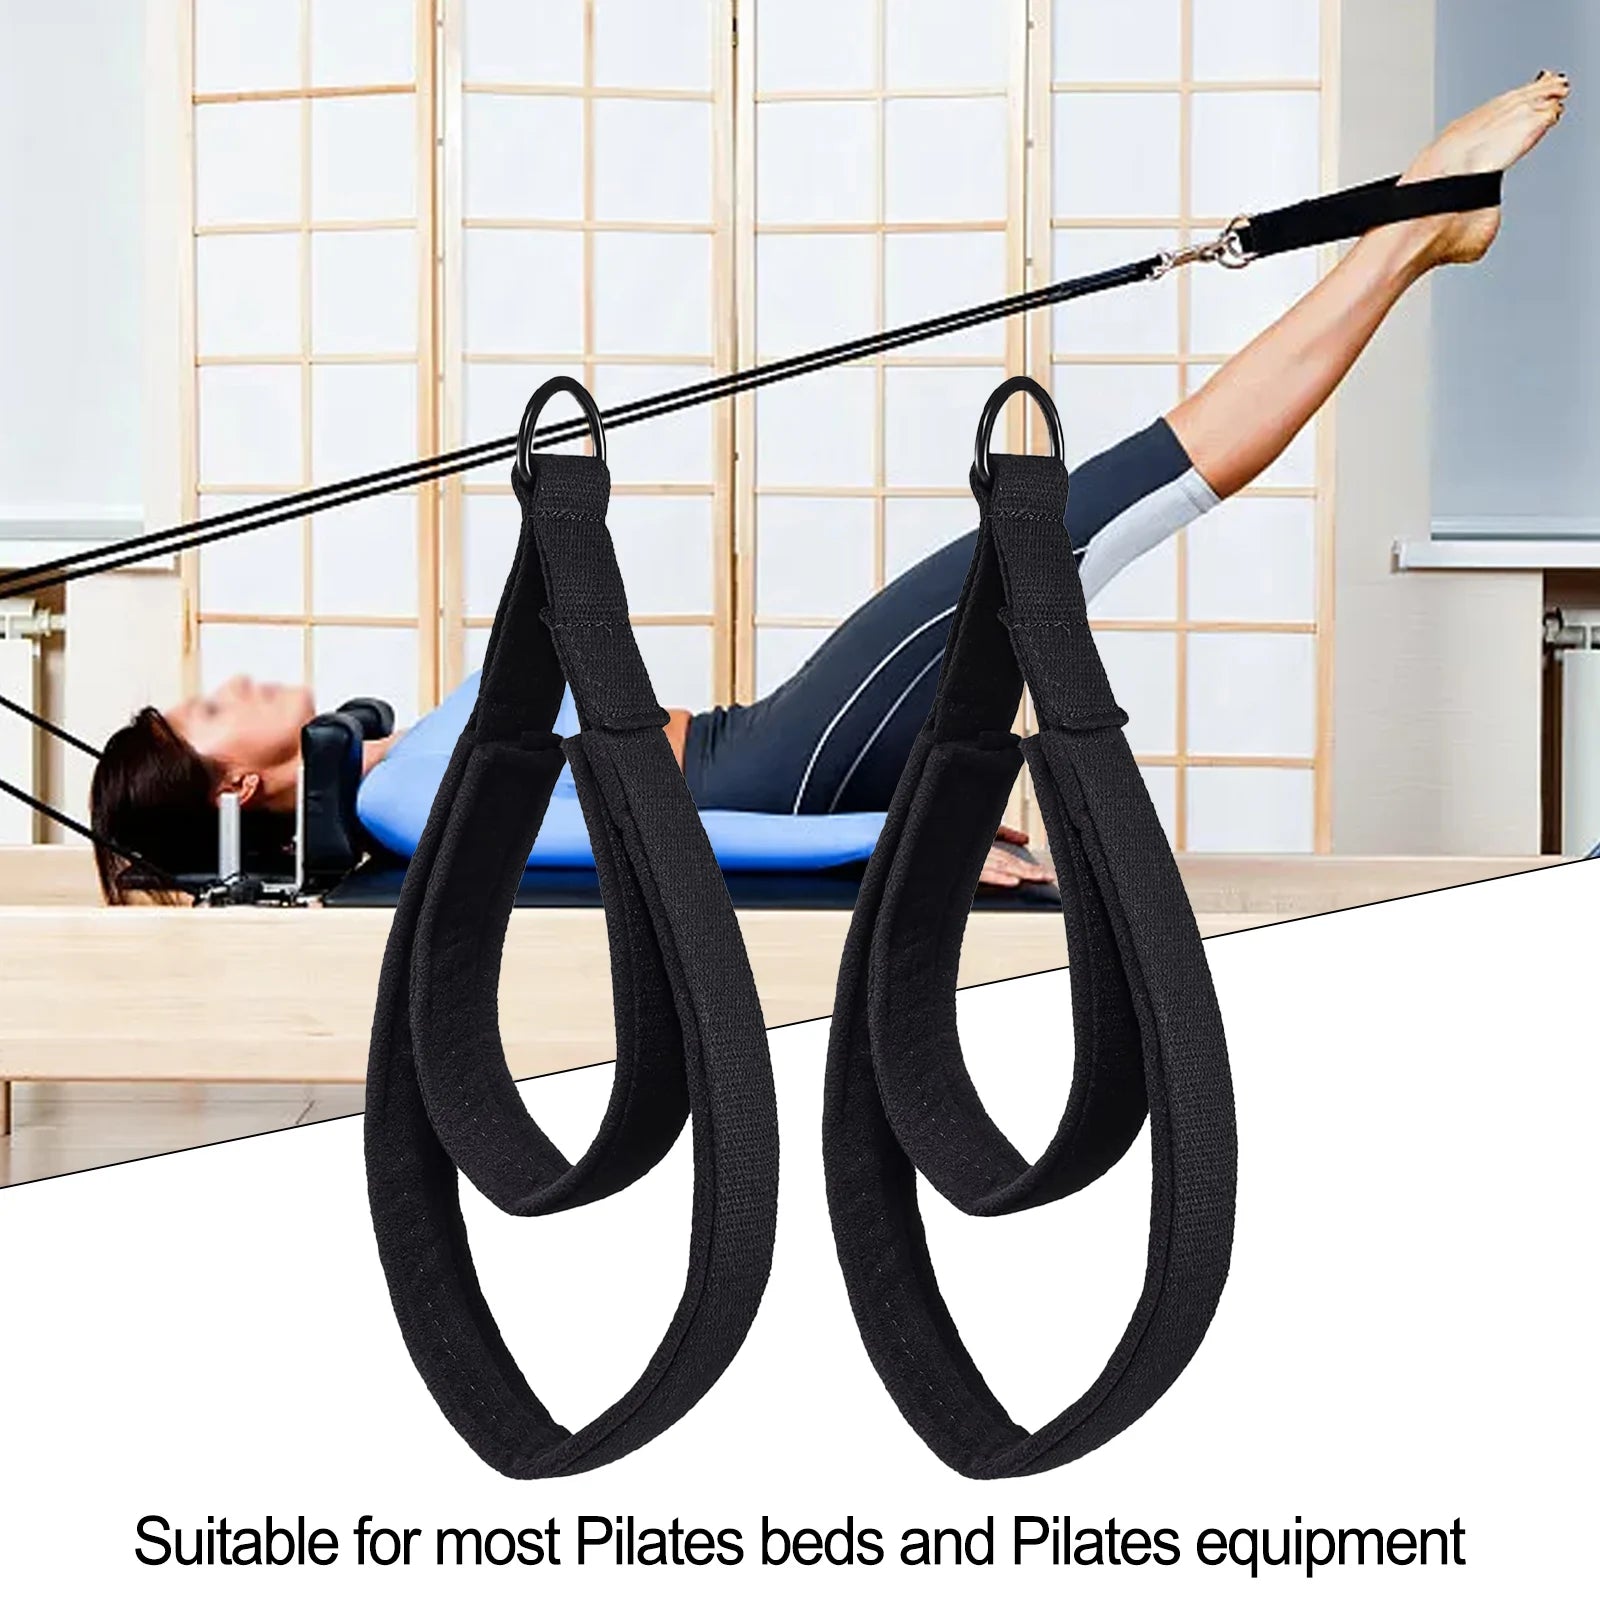 2pcs Yoga Strap Pilates Double Loop Adjustable D-Ring Straps Buckle Foot Reformer Yoga Fitness